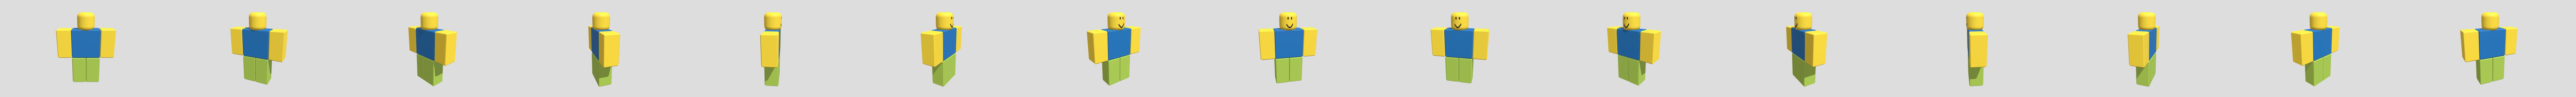 Classic Roblox skin - Download Free 3D model by